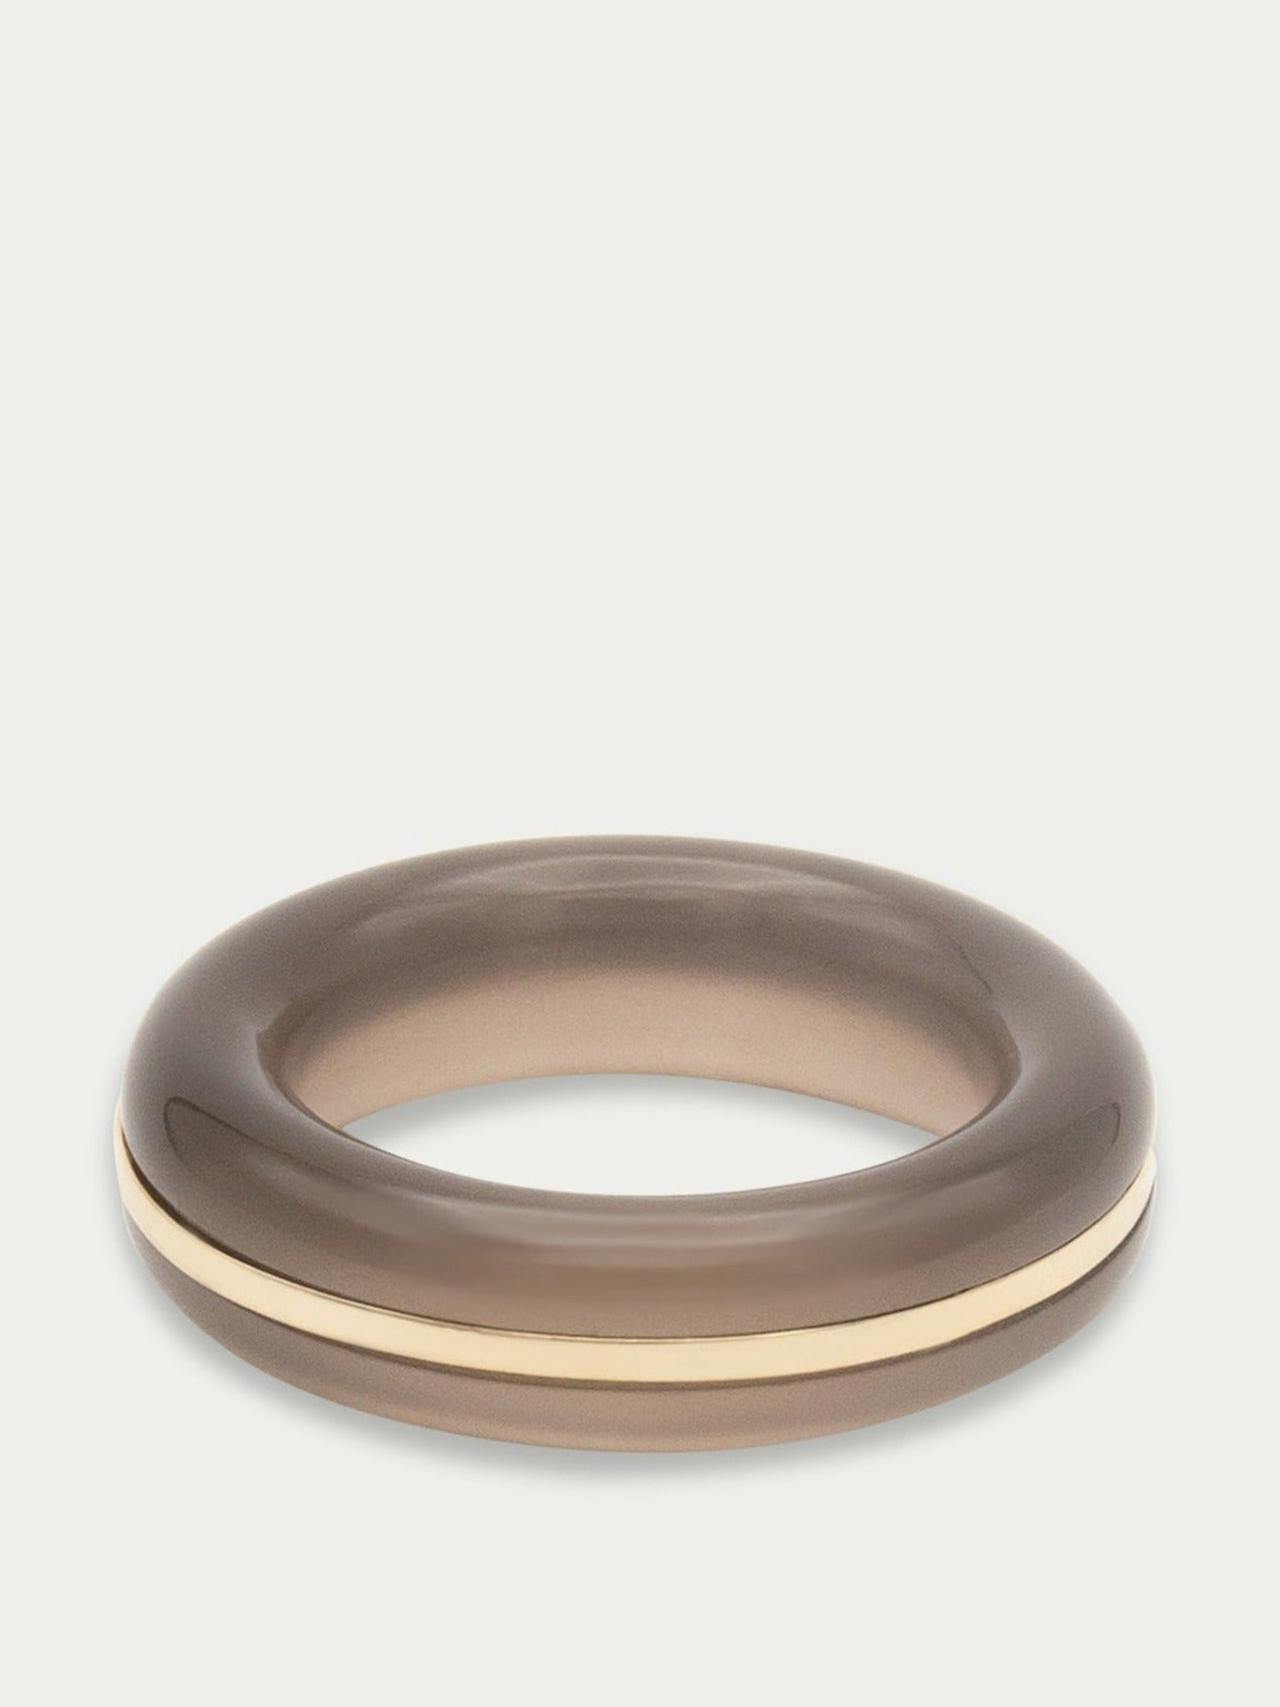 Essential gem grey agate stacking ring